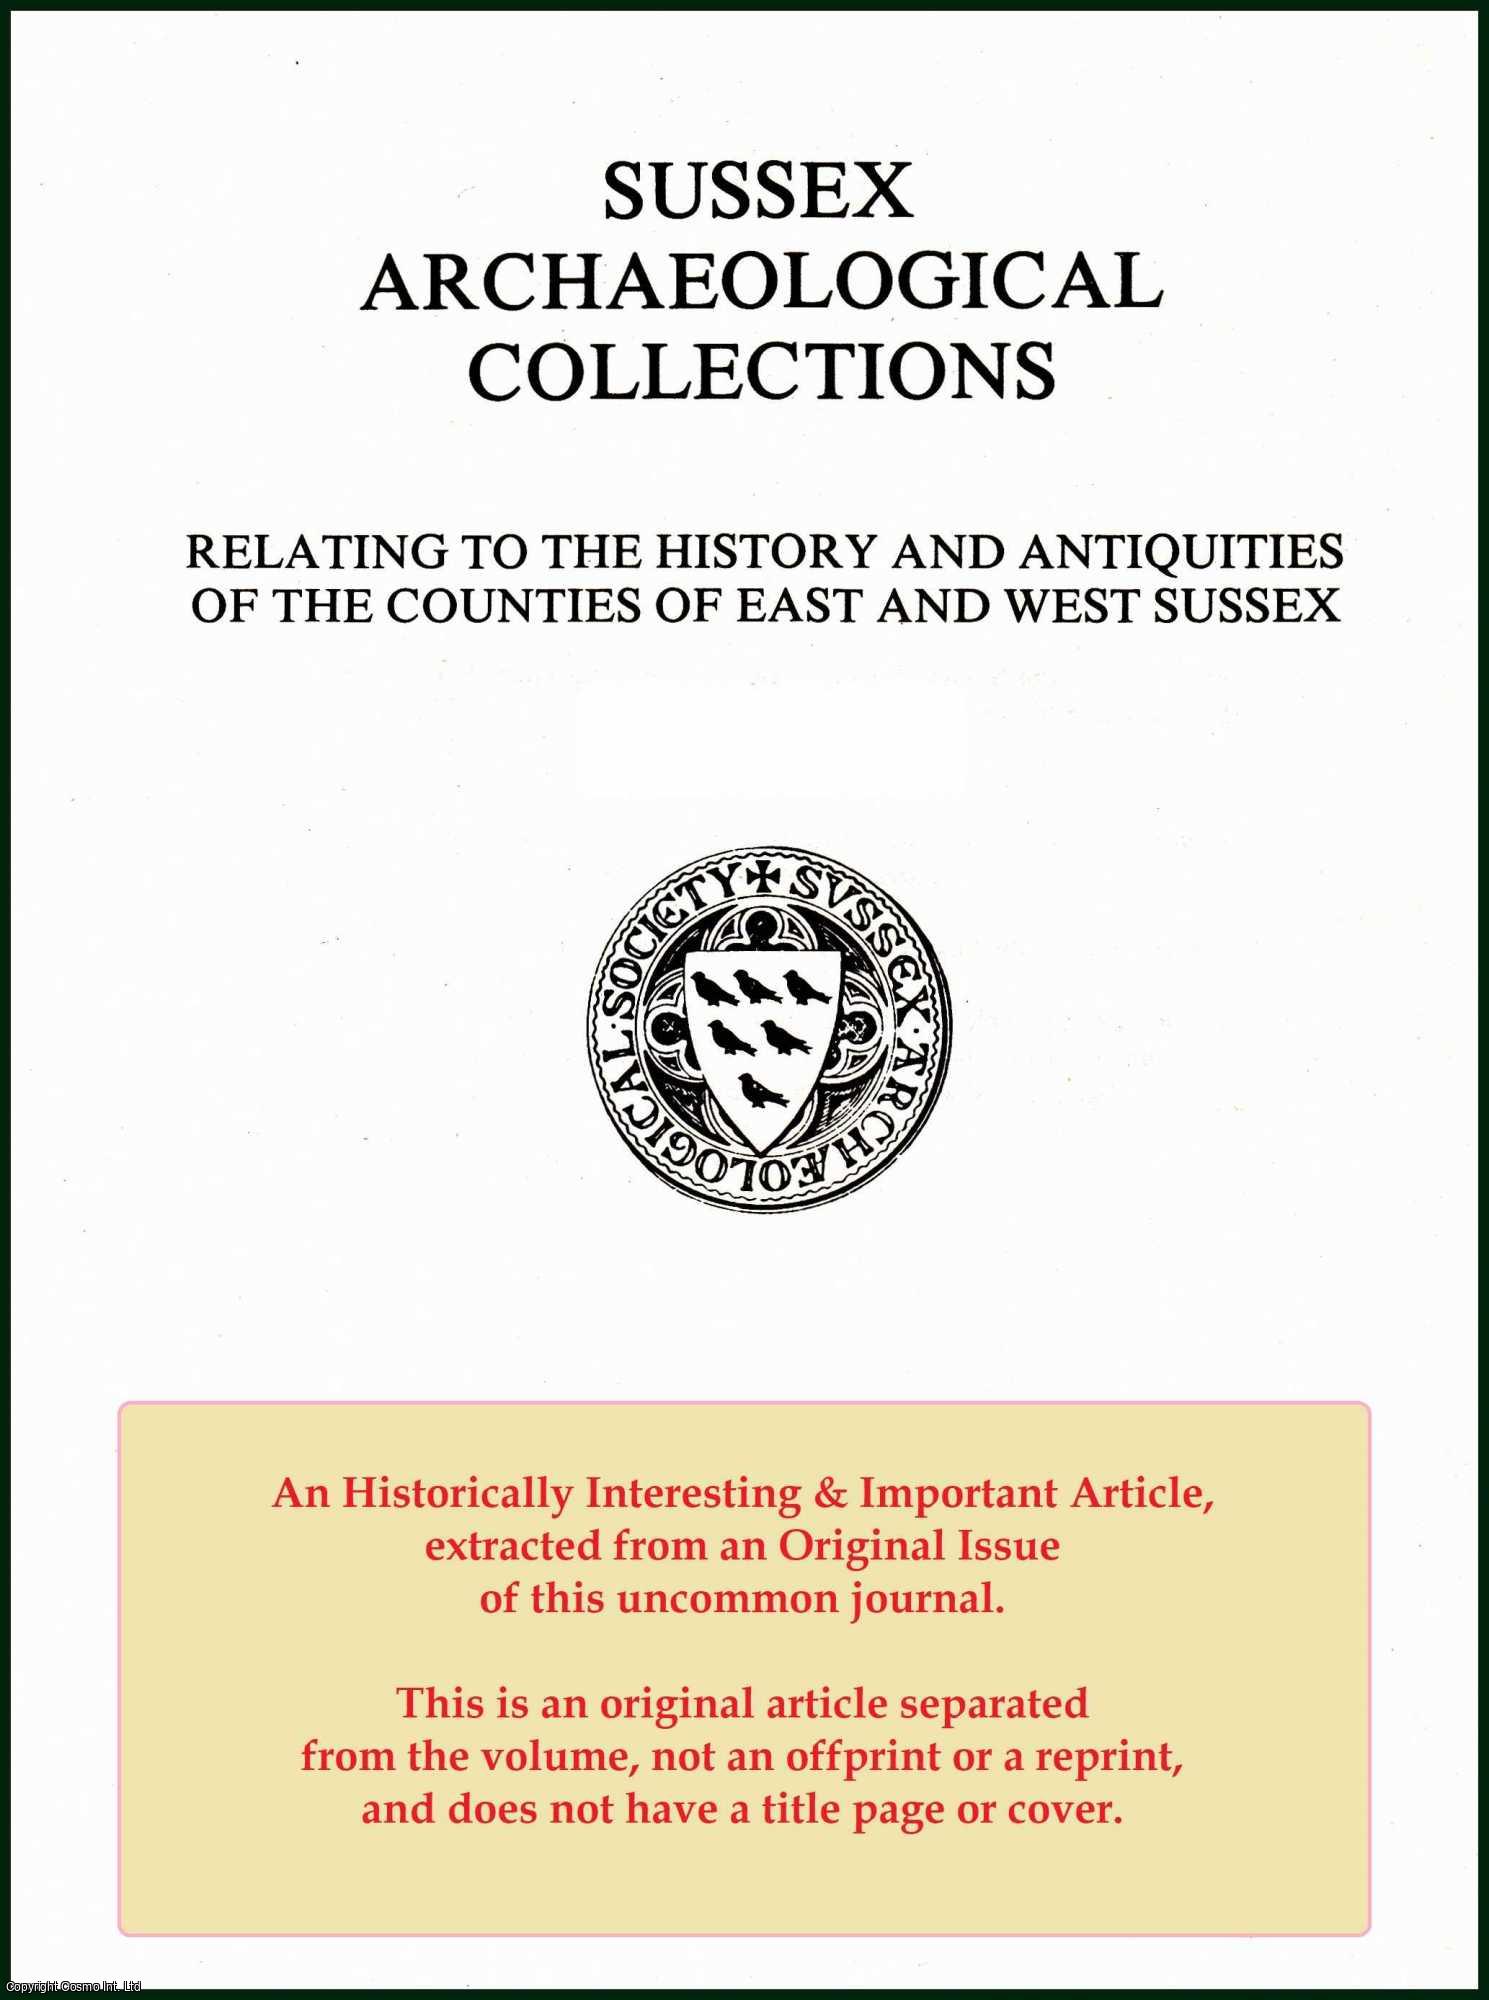 R. F. Hunnisett - The Last Sussex Abjurations a Postscript. An original article from the Journal of the Sussex Archaeological Society, 1965.